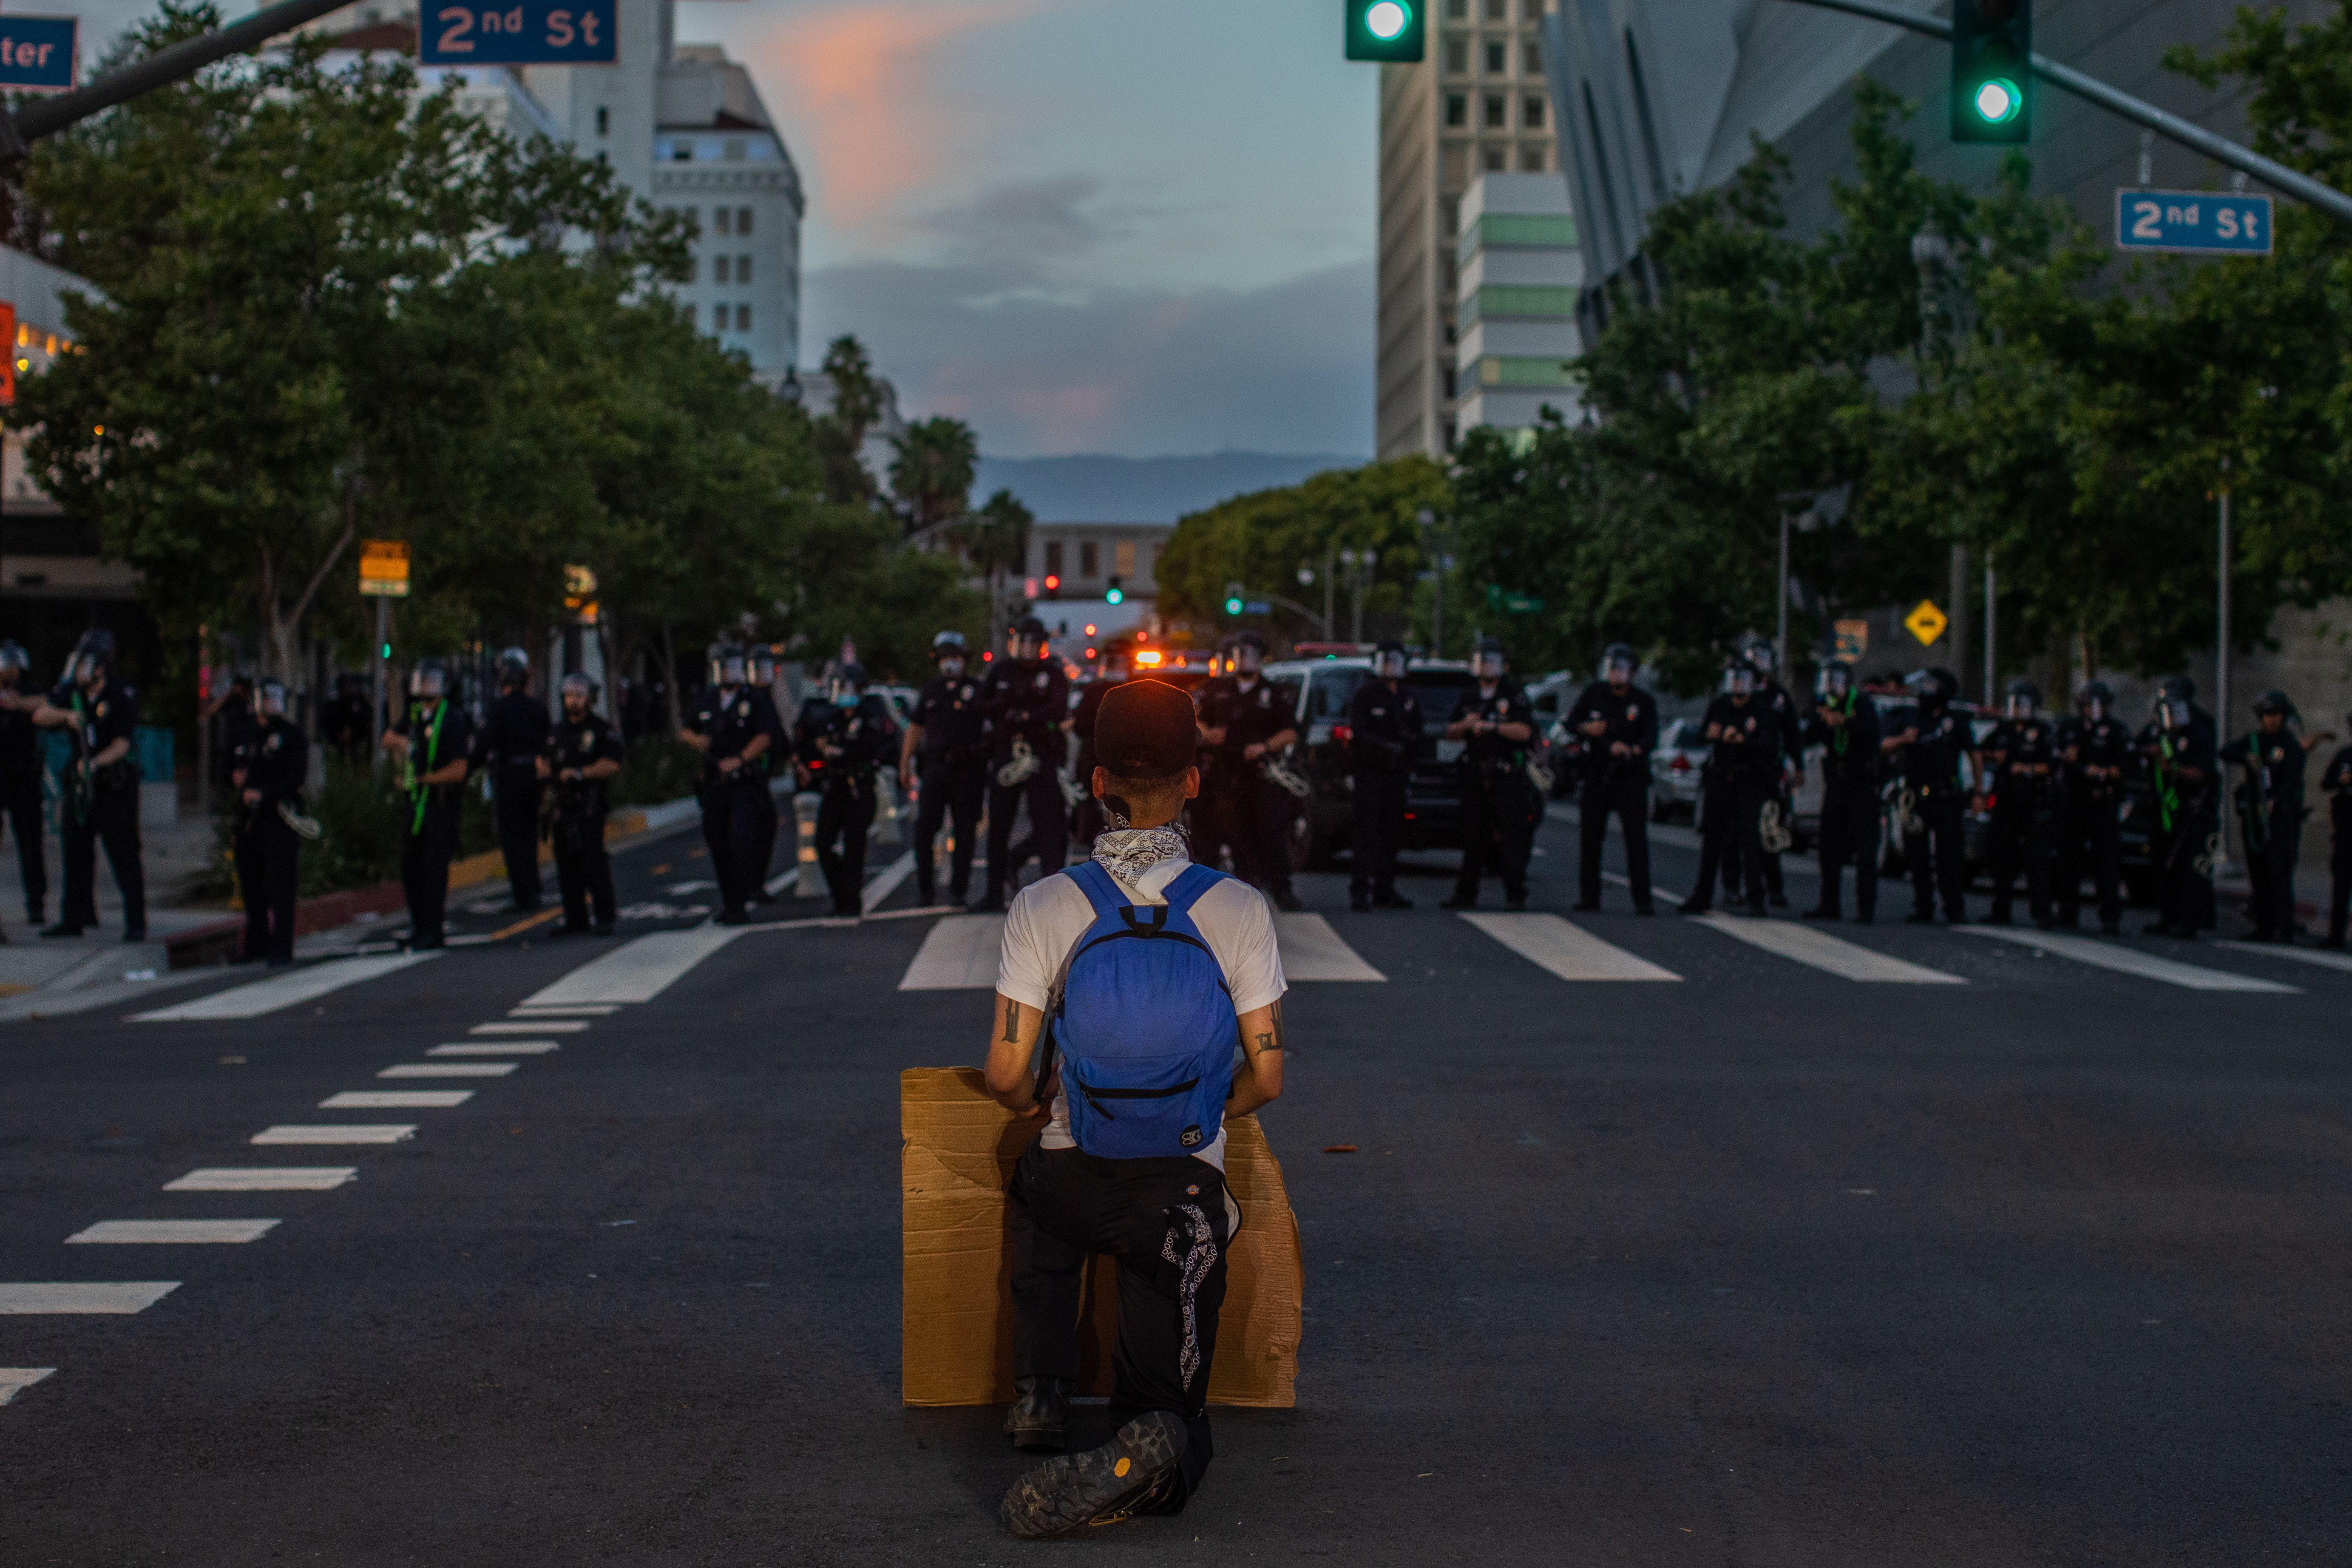 A demonstrator kneels in front of a Police line in Downtown Los Angeles on May 30, 2020.